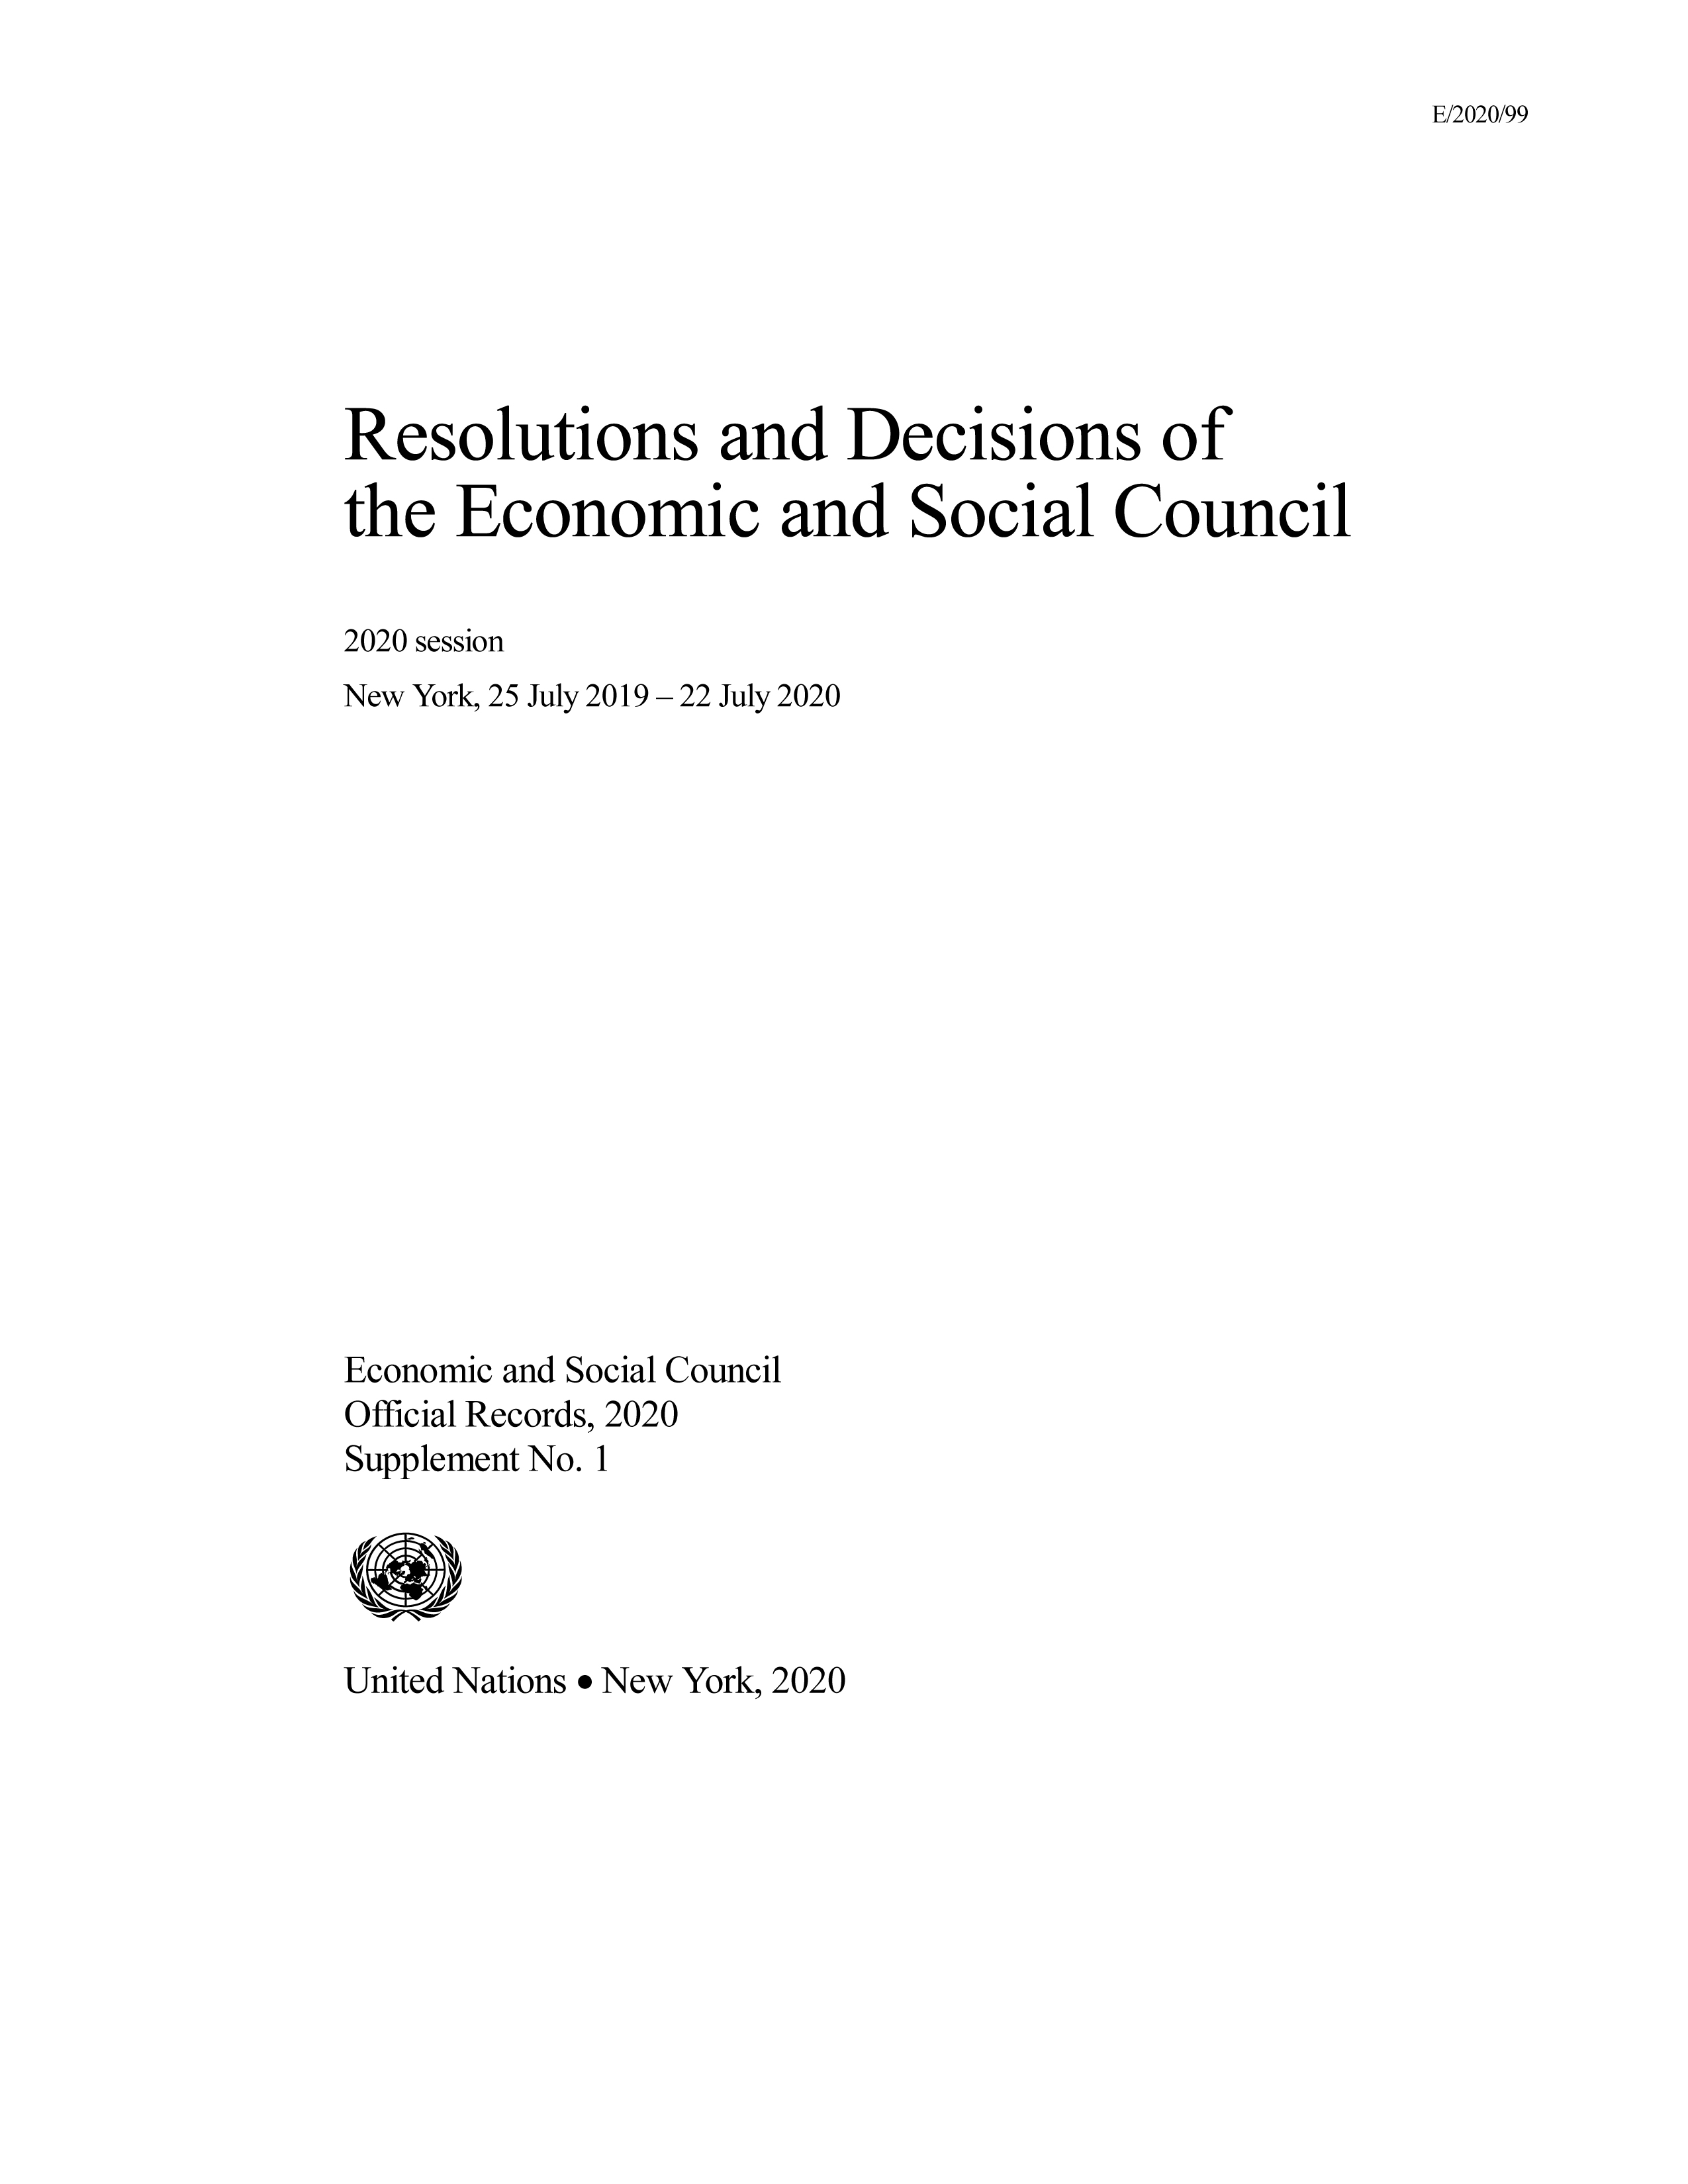 image of Resolutions and Decisions of the Economic and Social Council: 2020 Session